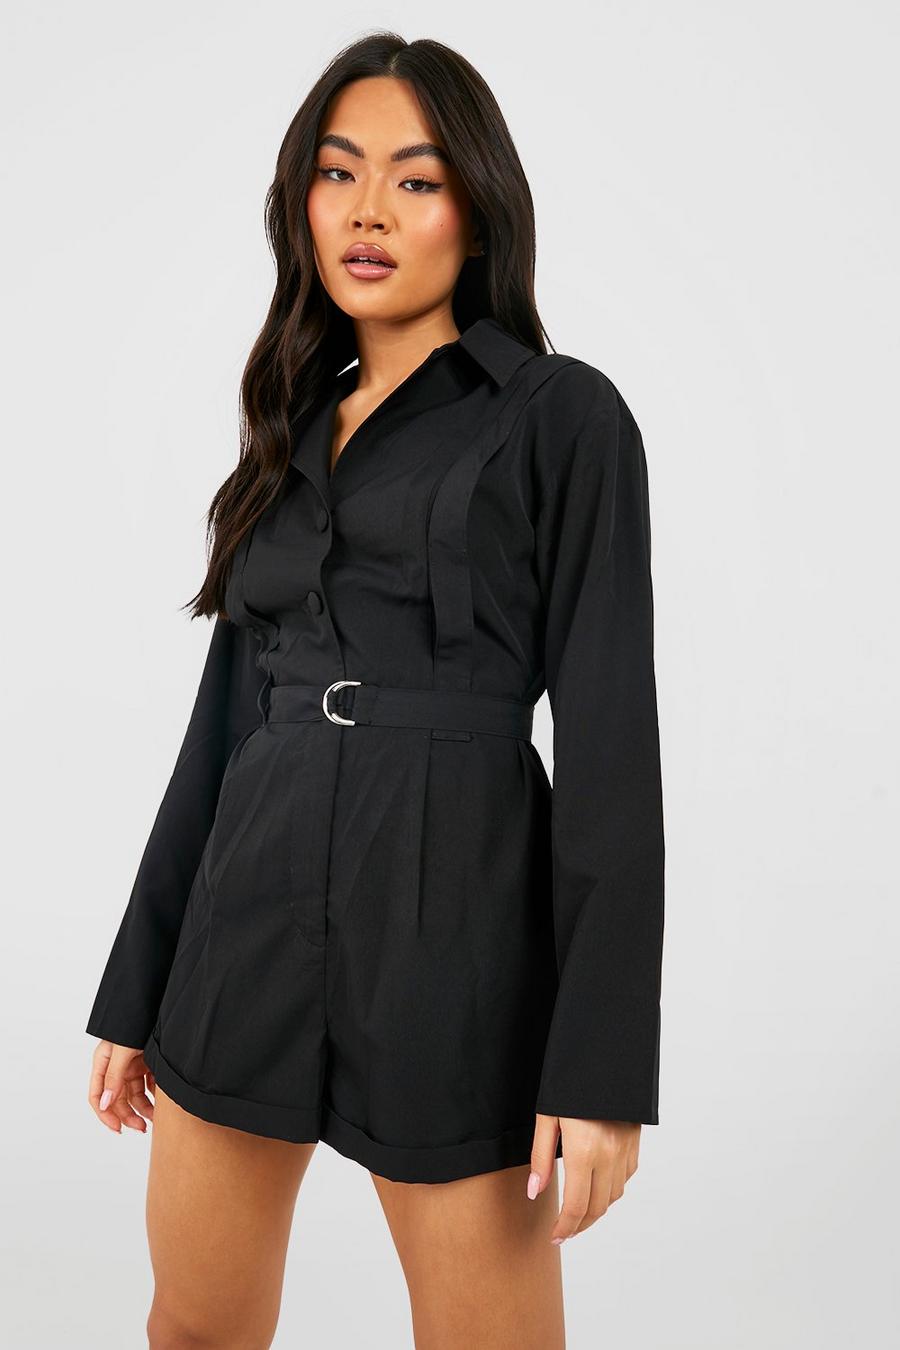 Black noir Belted Shirt Style Utility Playsuit